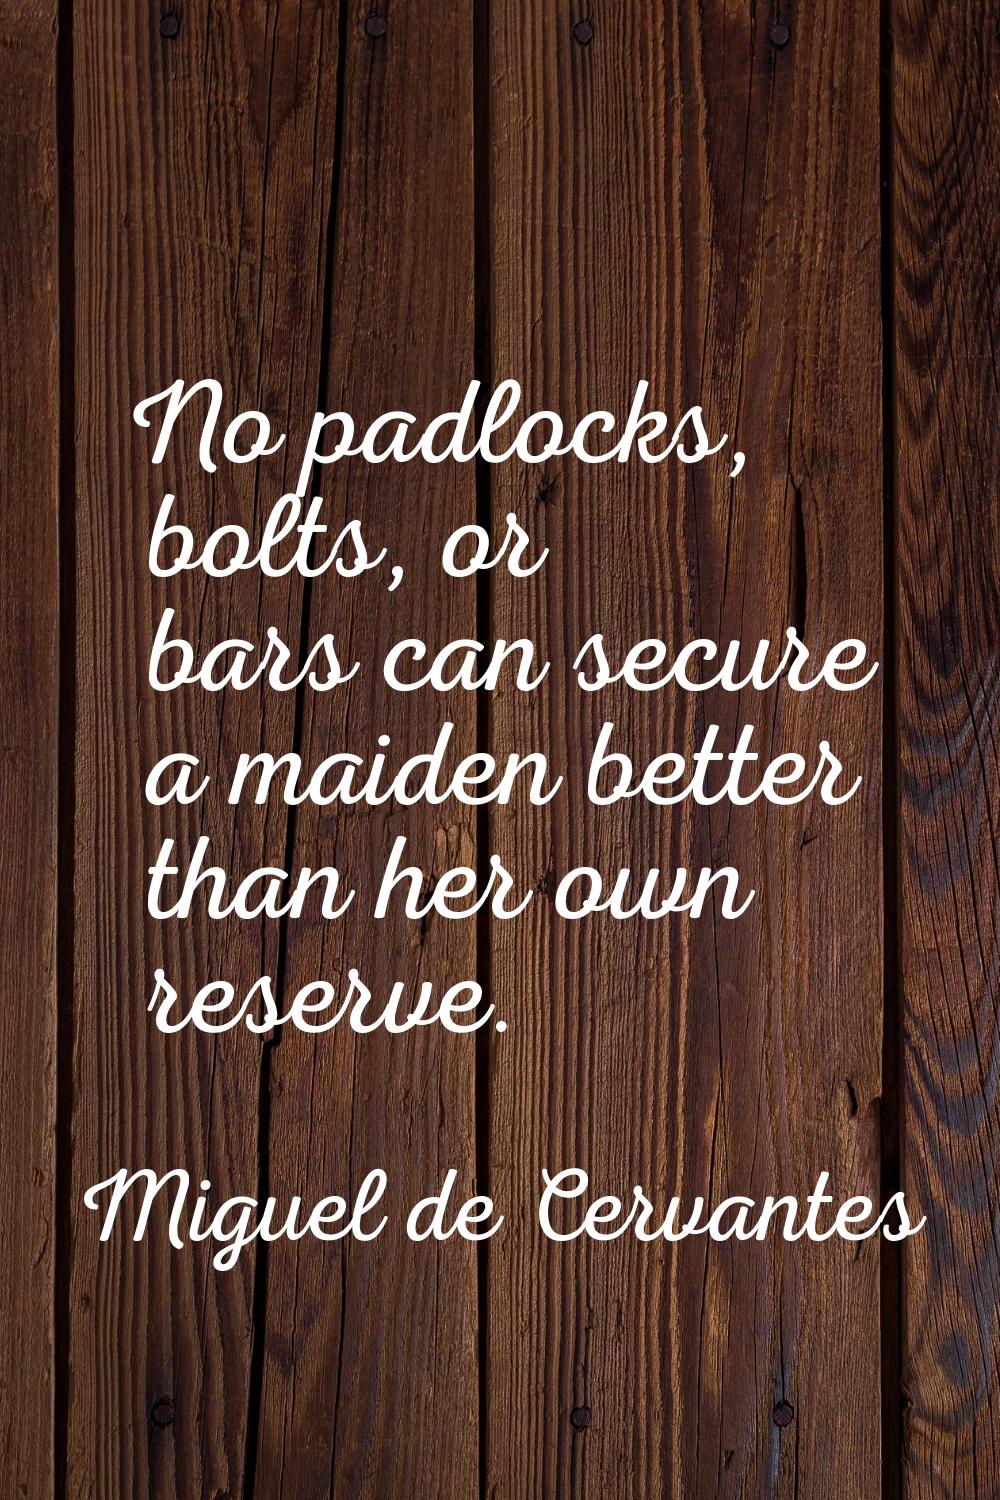 No padlocks, bolts, or bars can secure a maiden better than her own reserve.